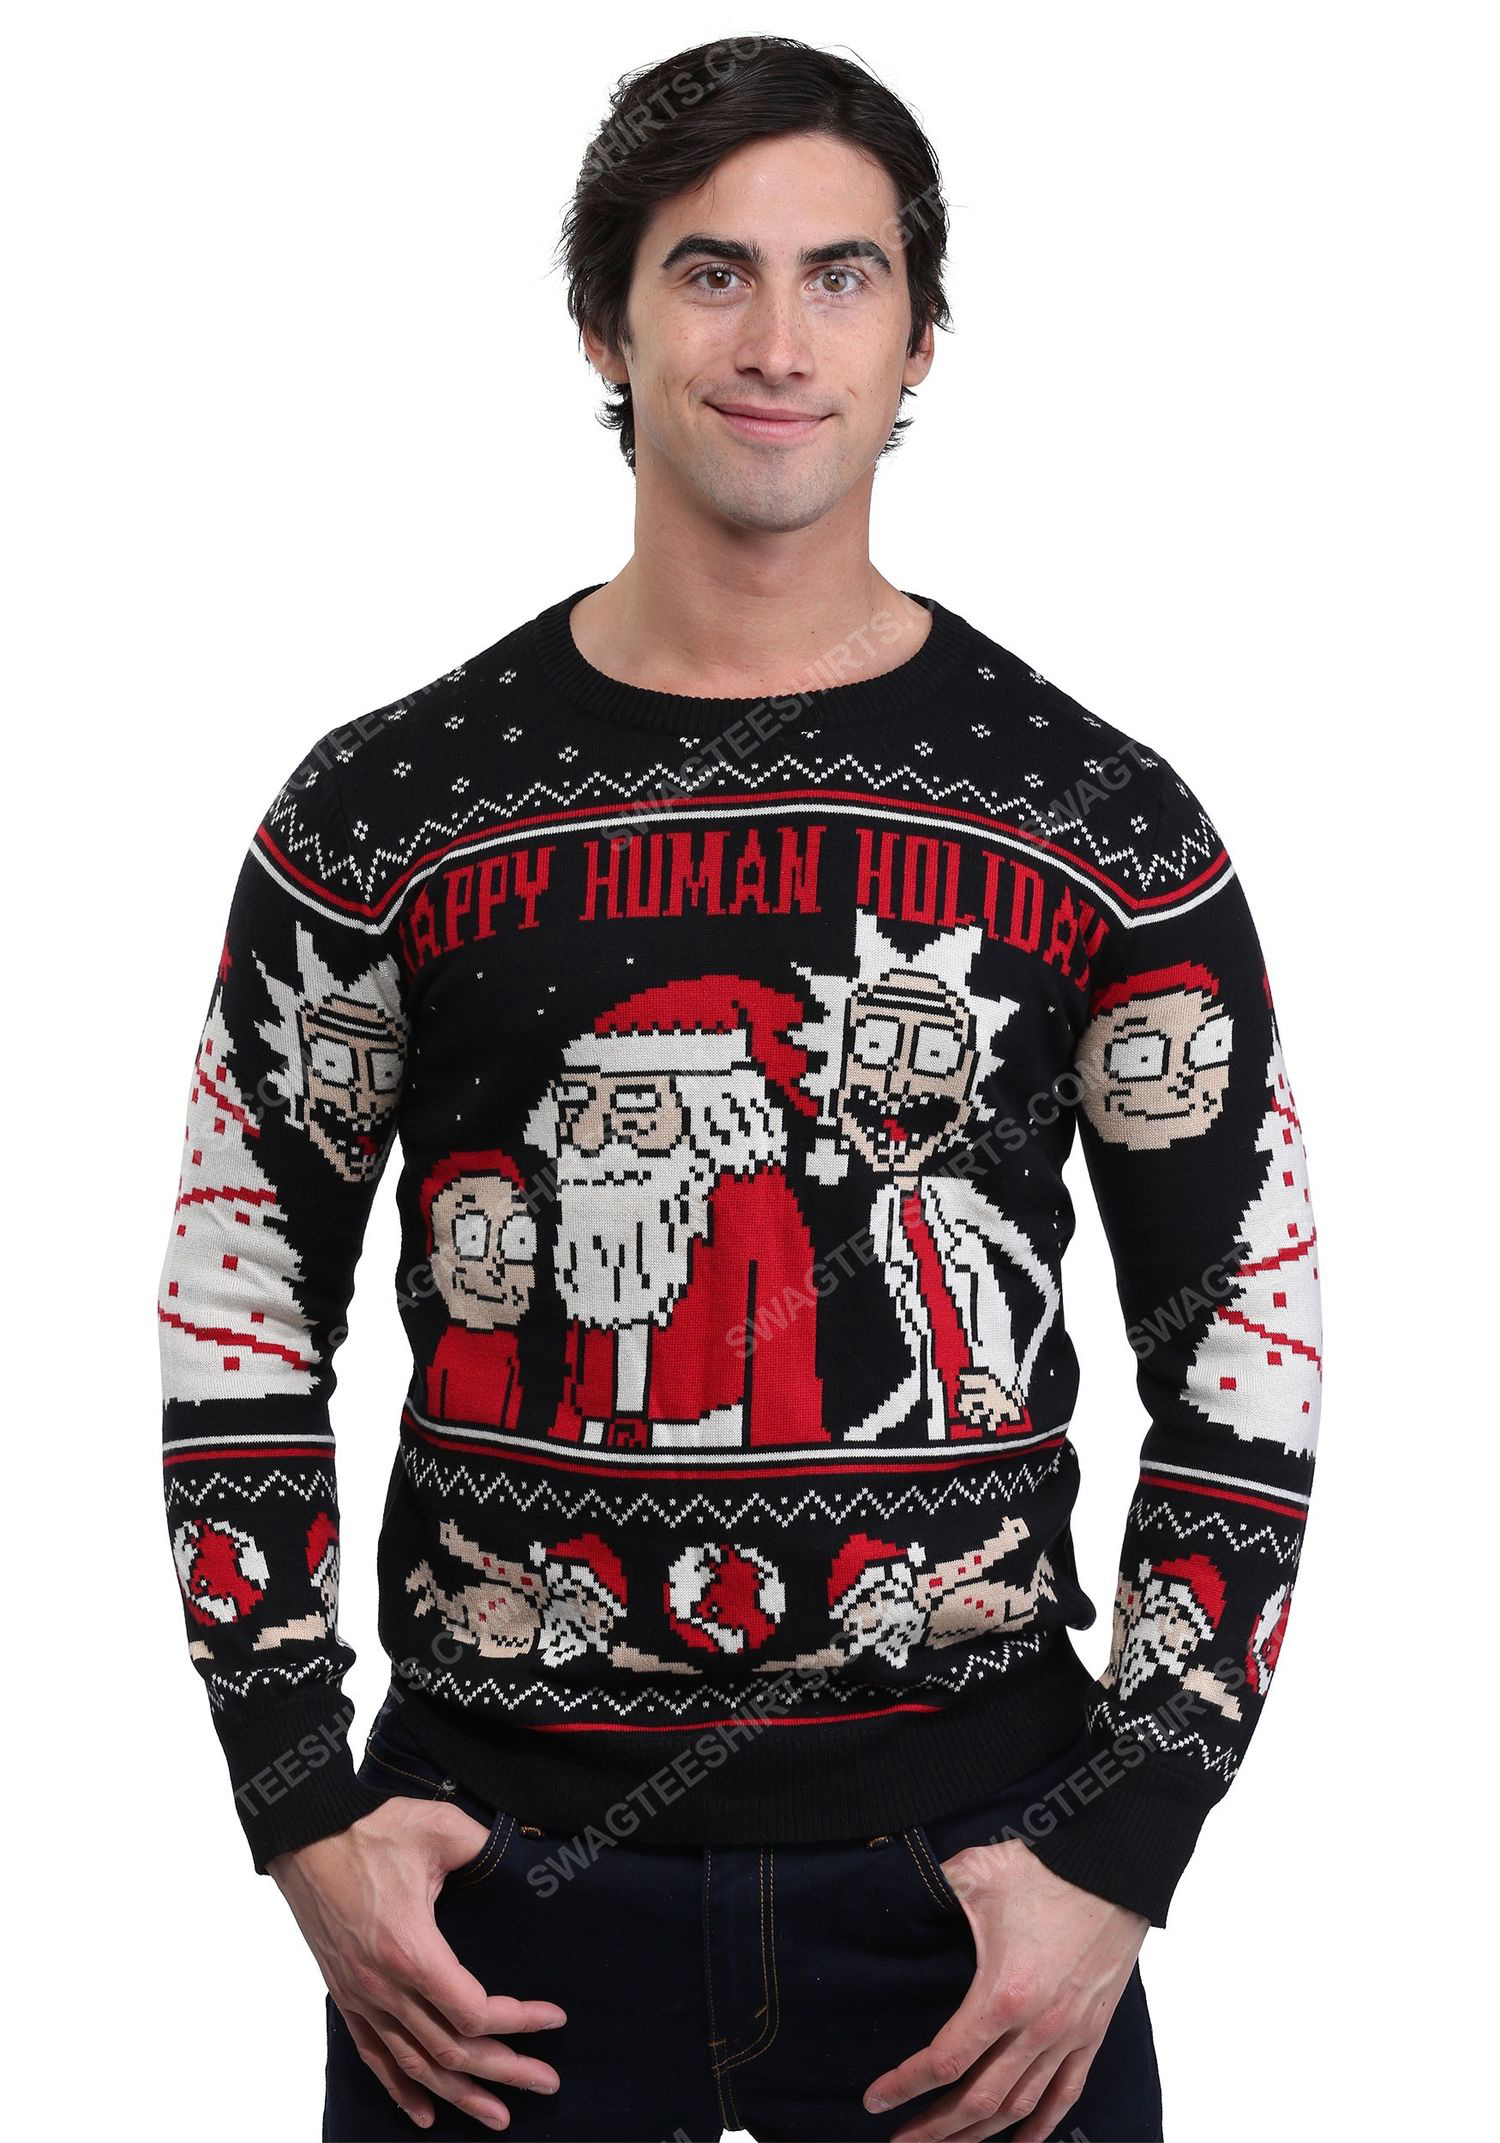 Tv show rick and morty happy human holiday ugly christmas sweater 1 - Copy (2)